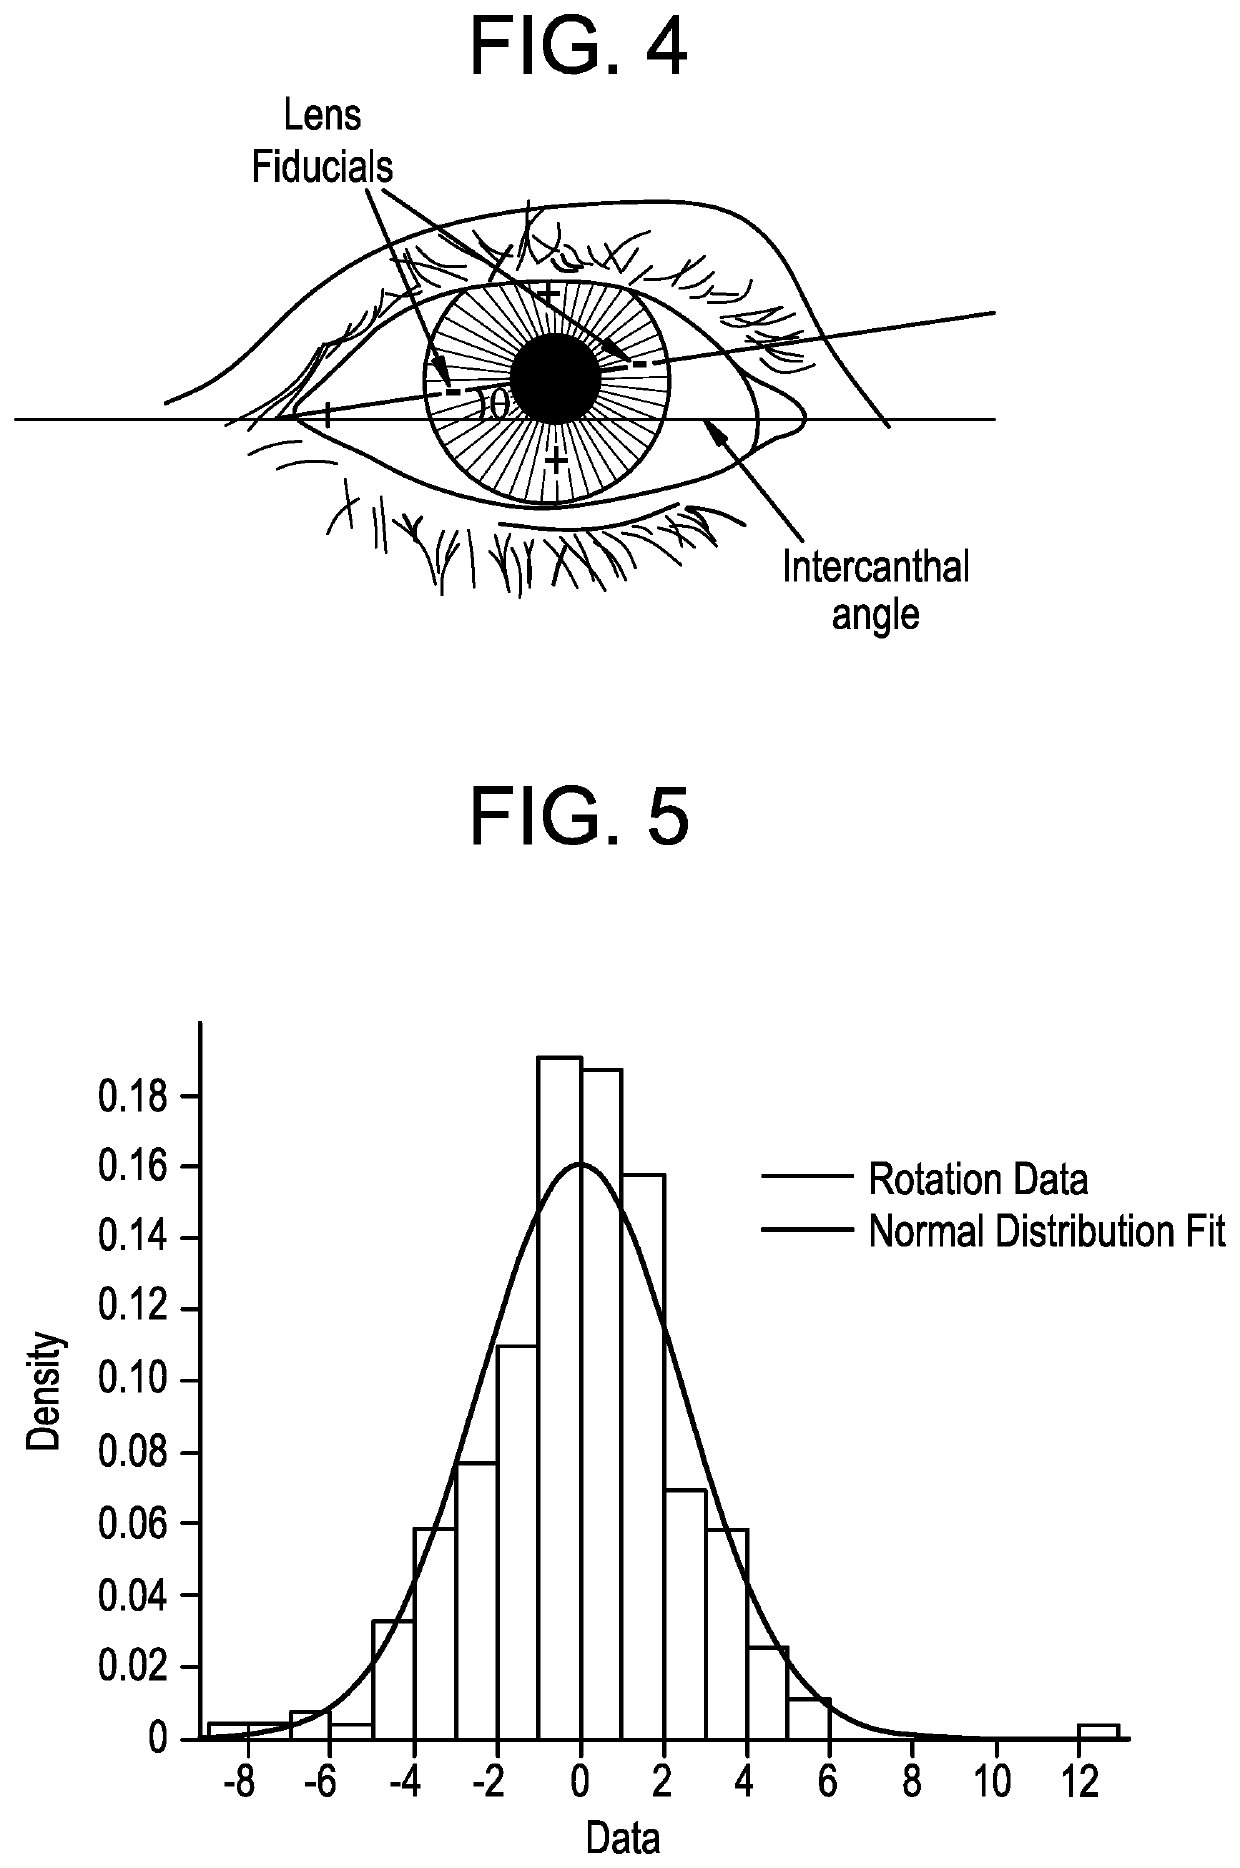 Method and means for evaluating toric contact lens rotational stability